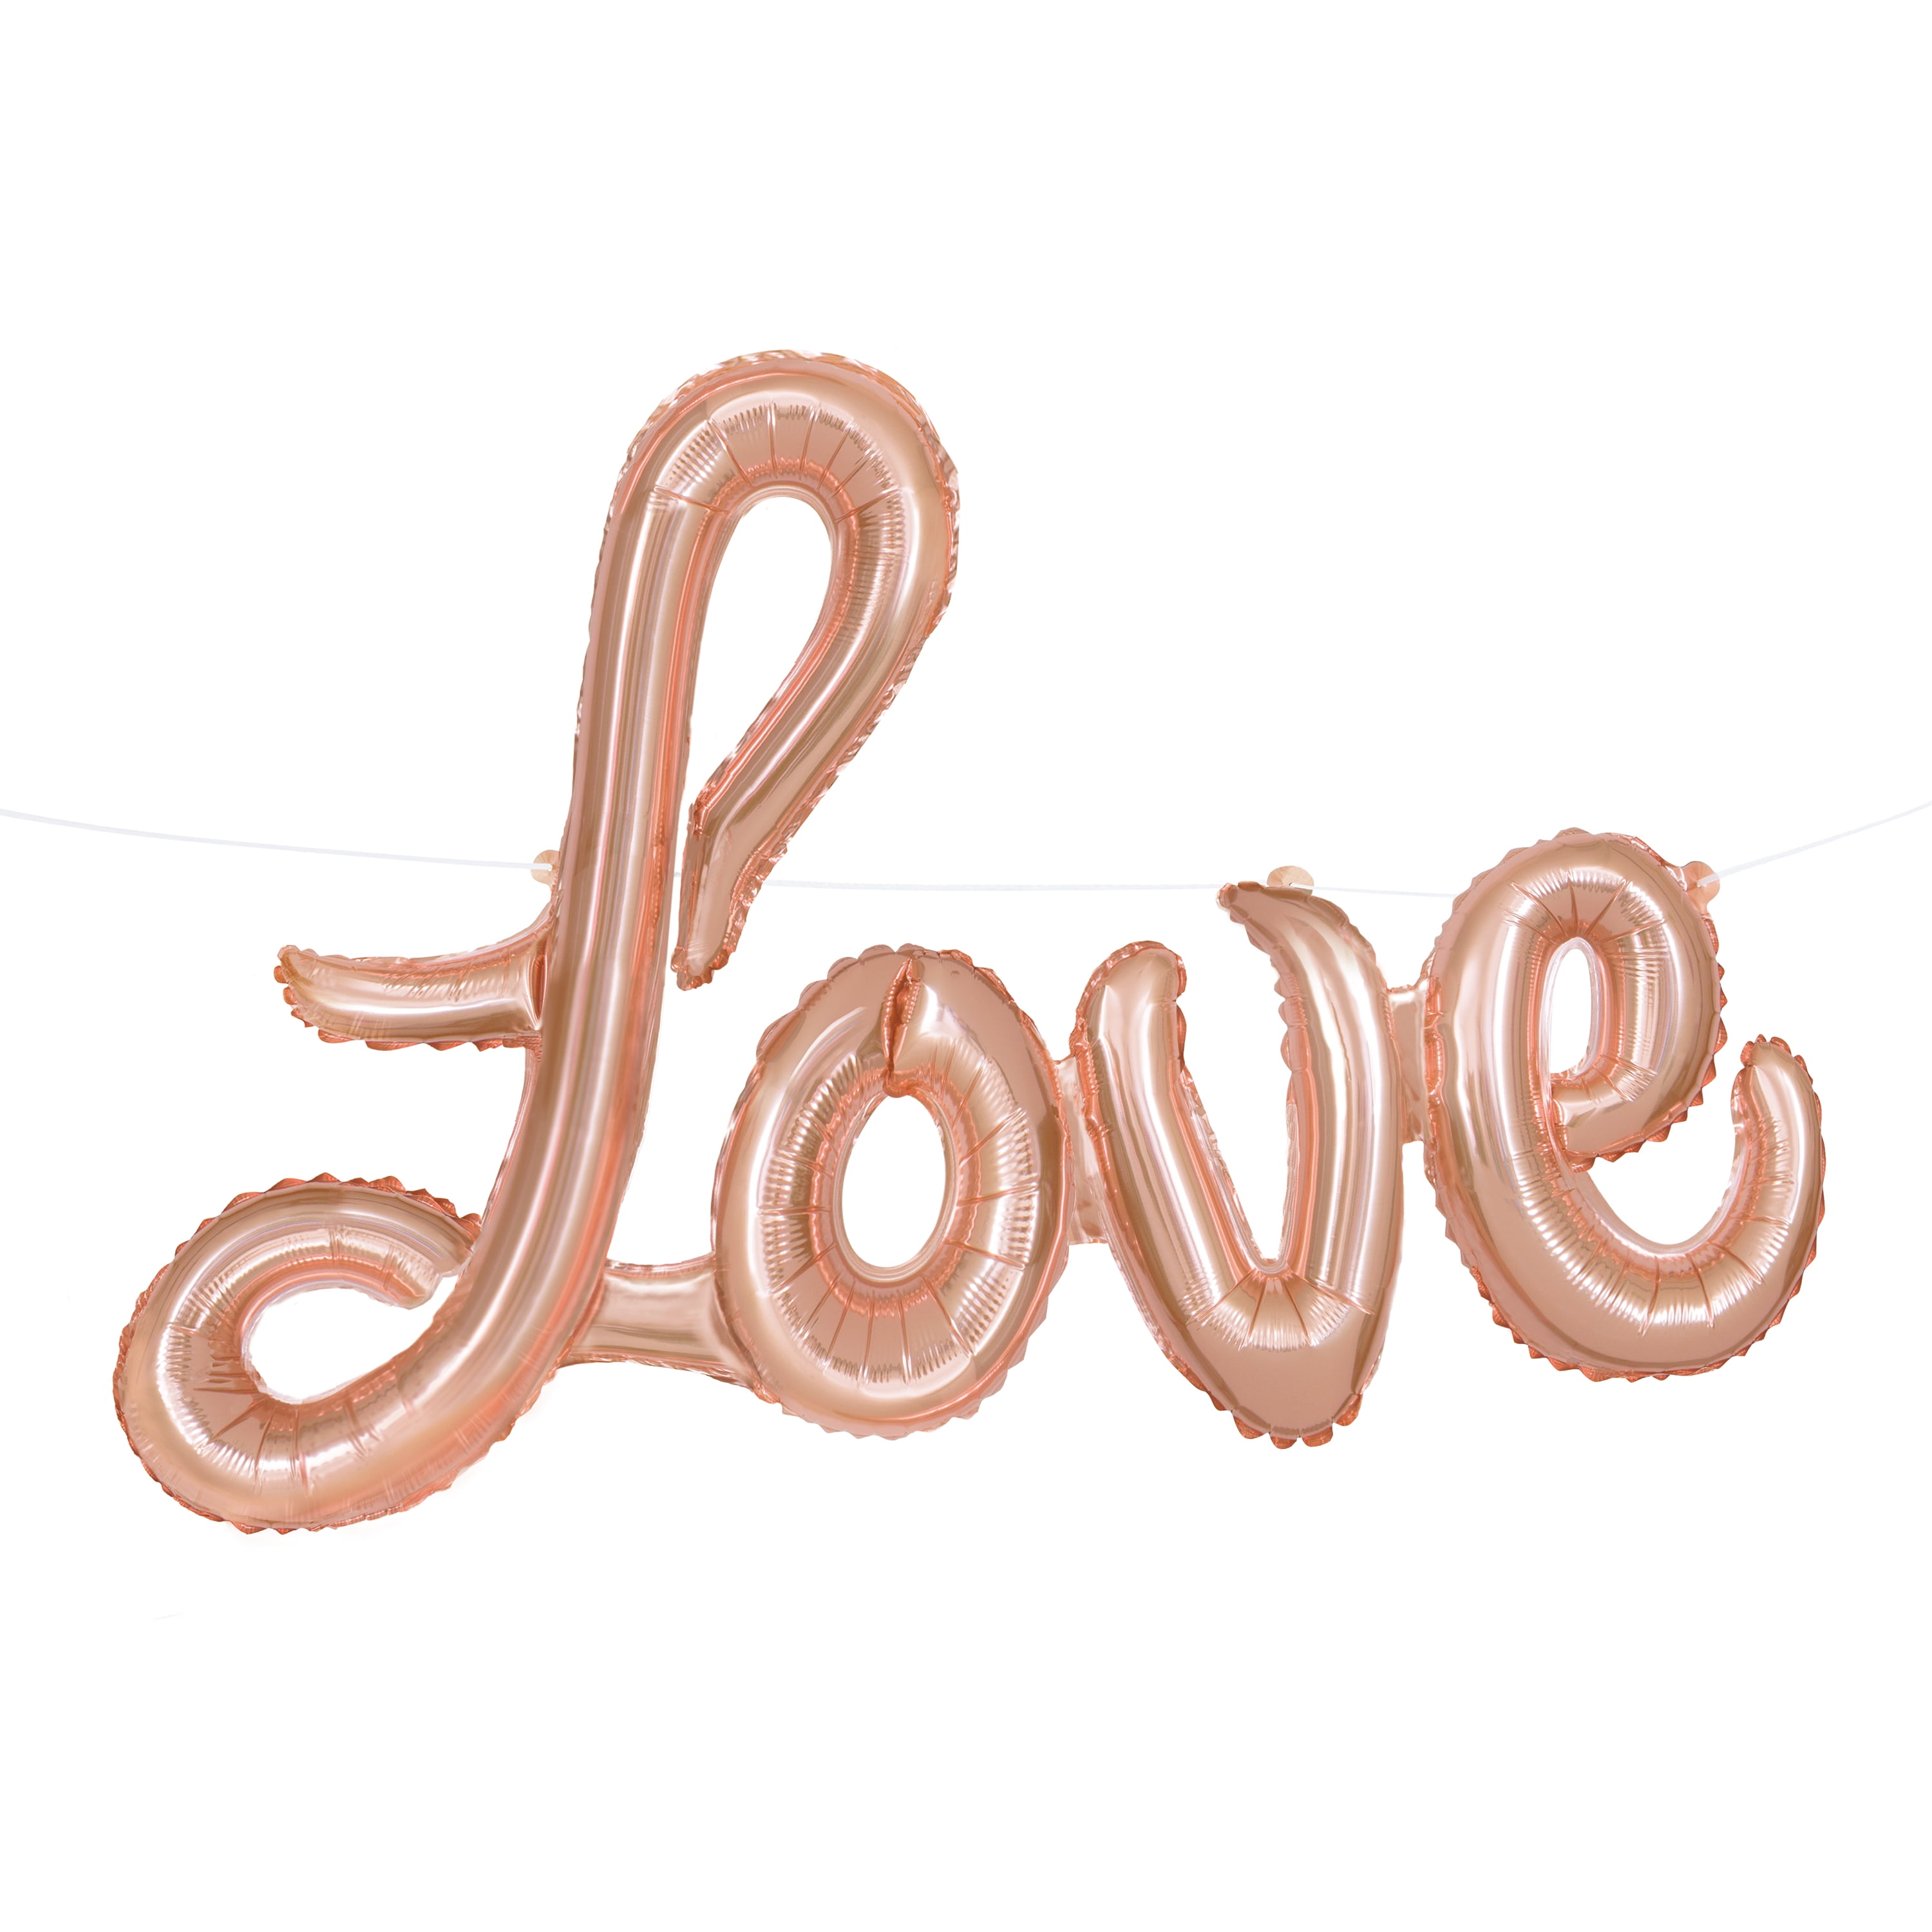 Party Photo Prop Large Foil Love Balloons in Gold or Silver I Love You Balloon 